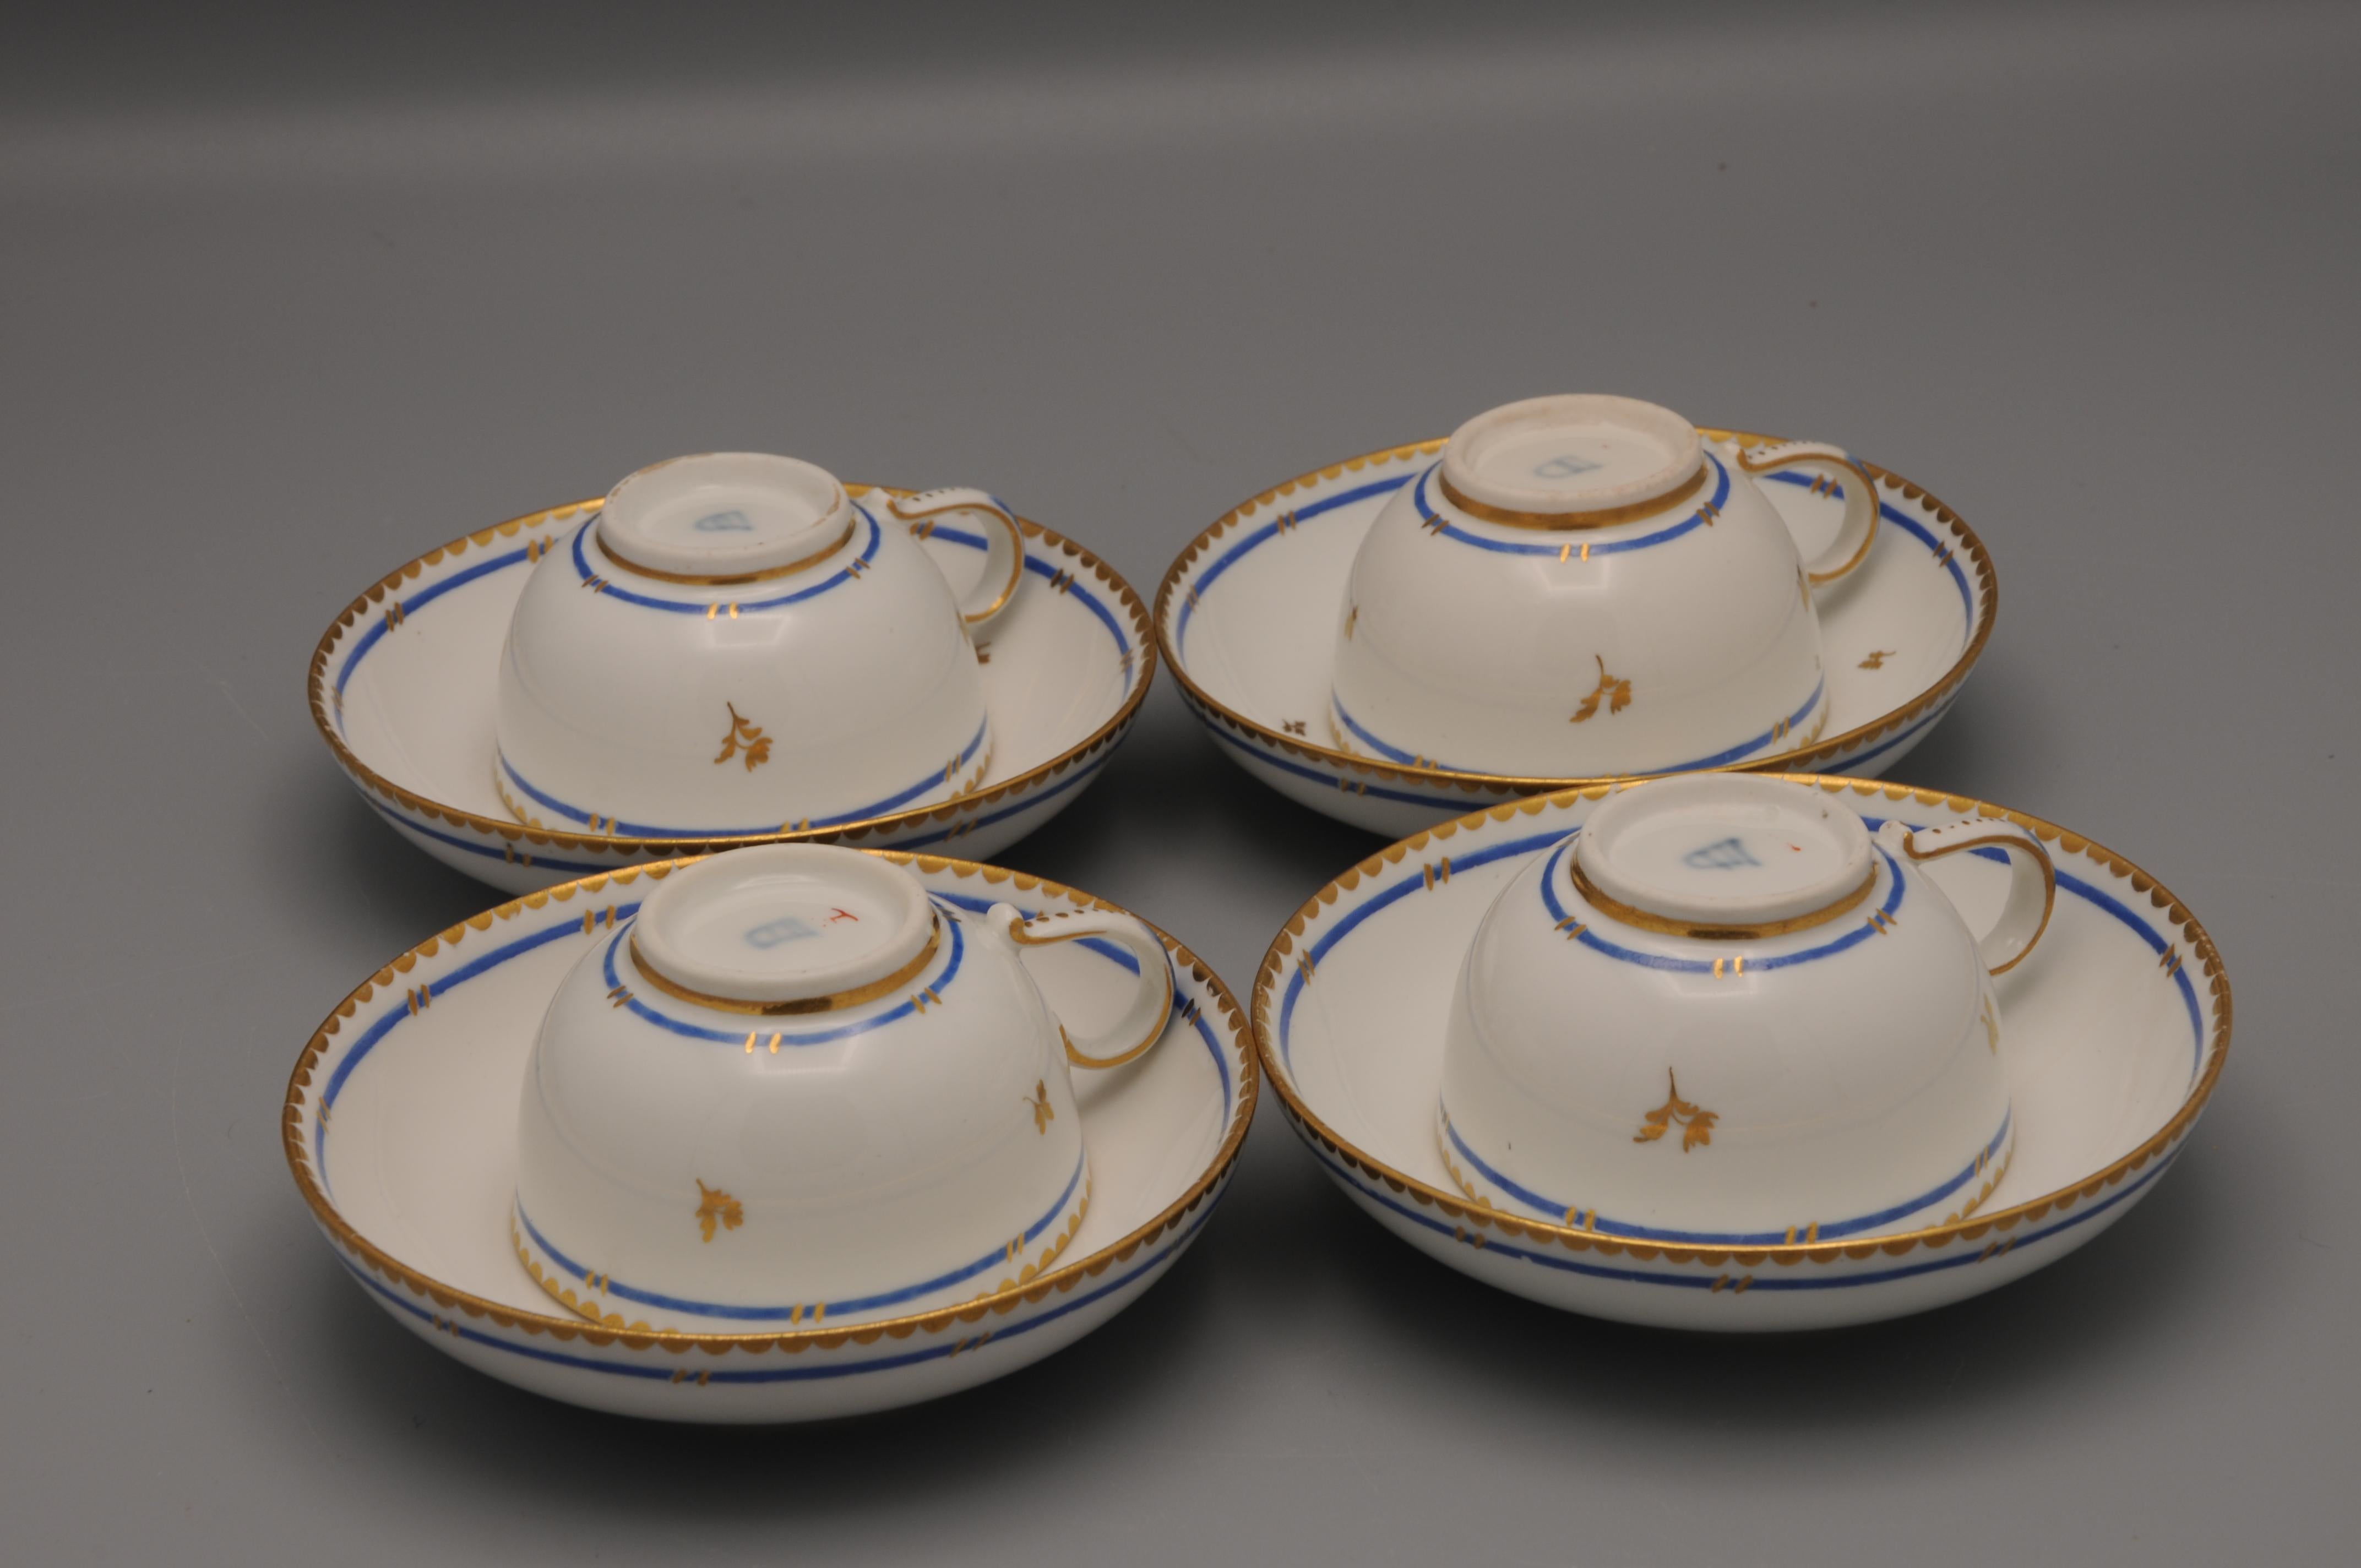 Vienna porcelain - 4 cups and saucers, 1781 For Sale 2